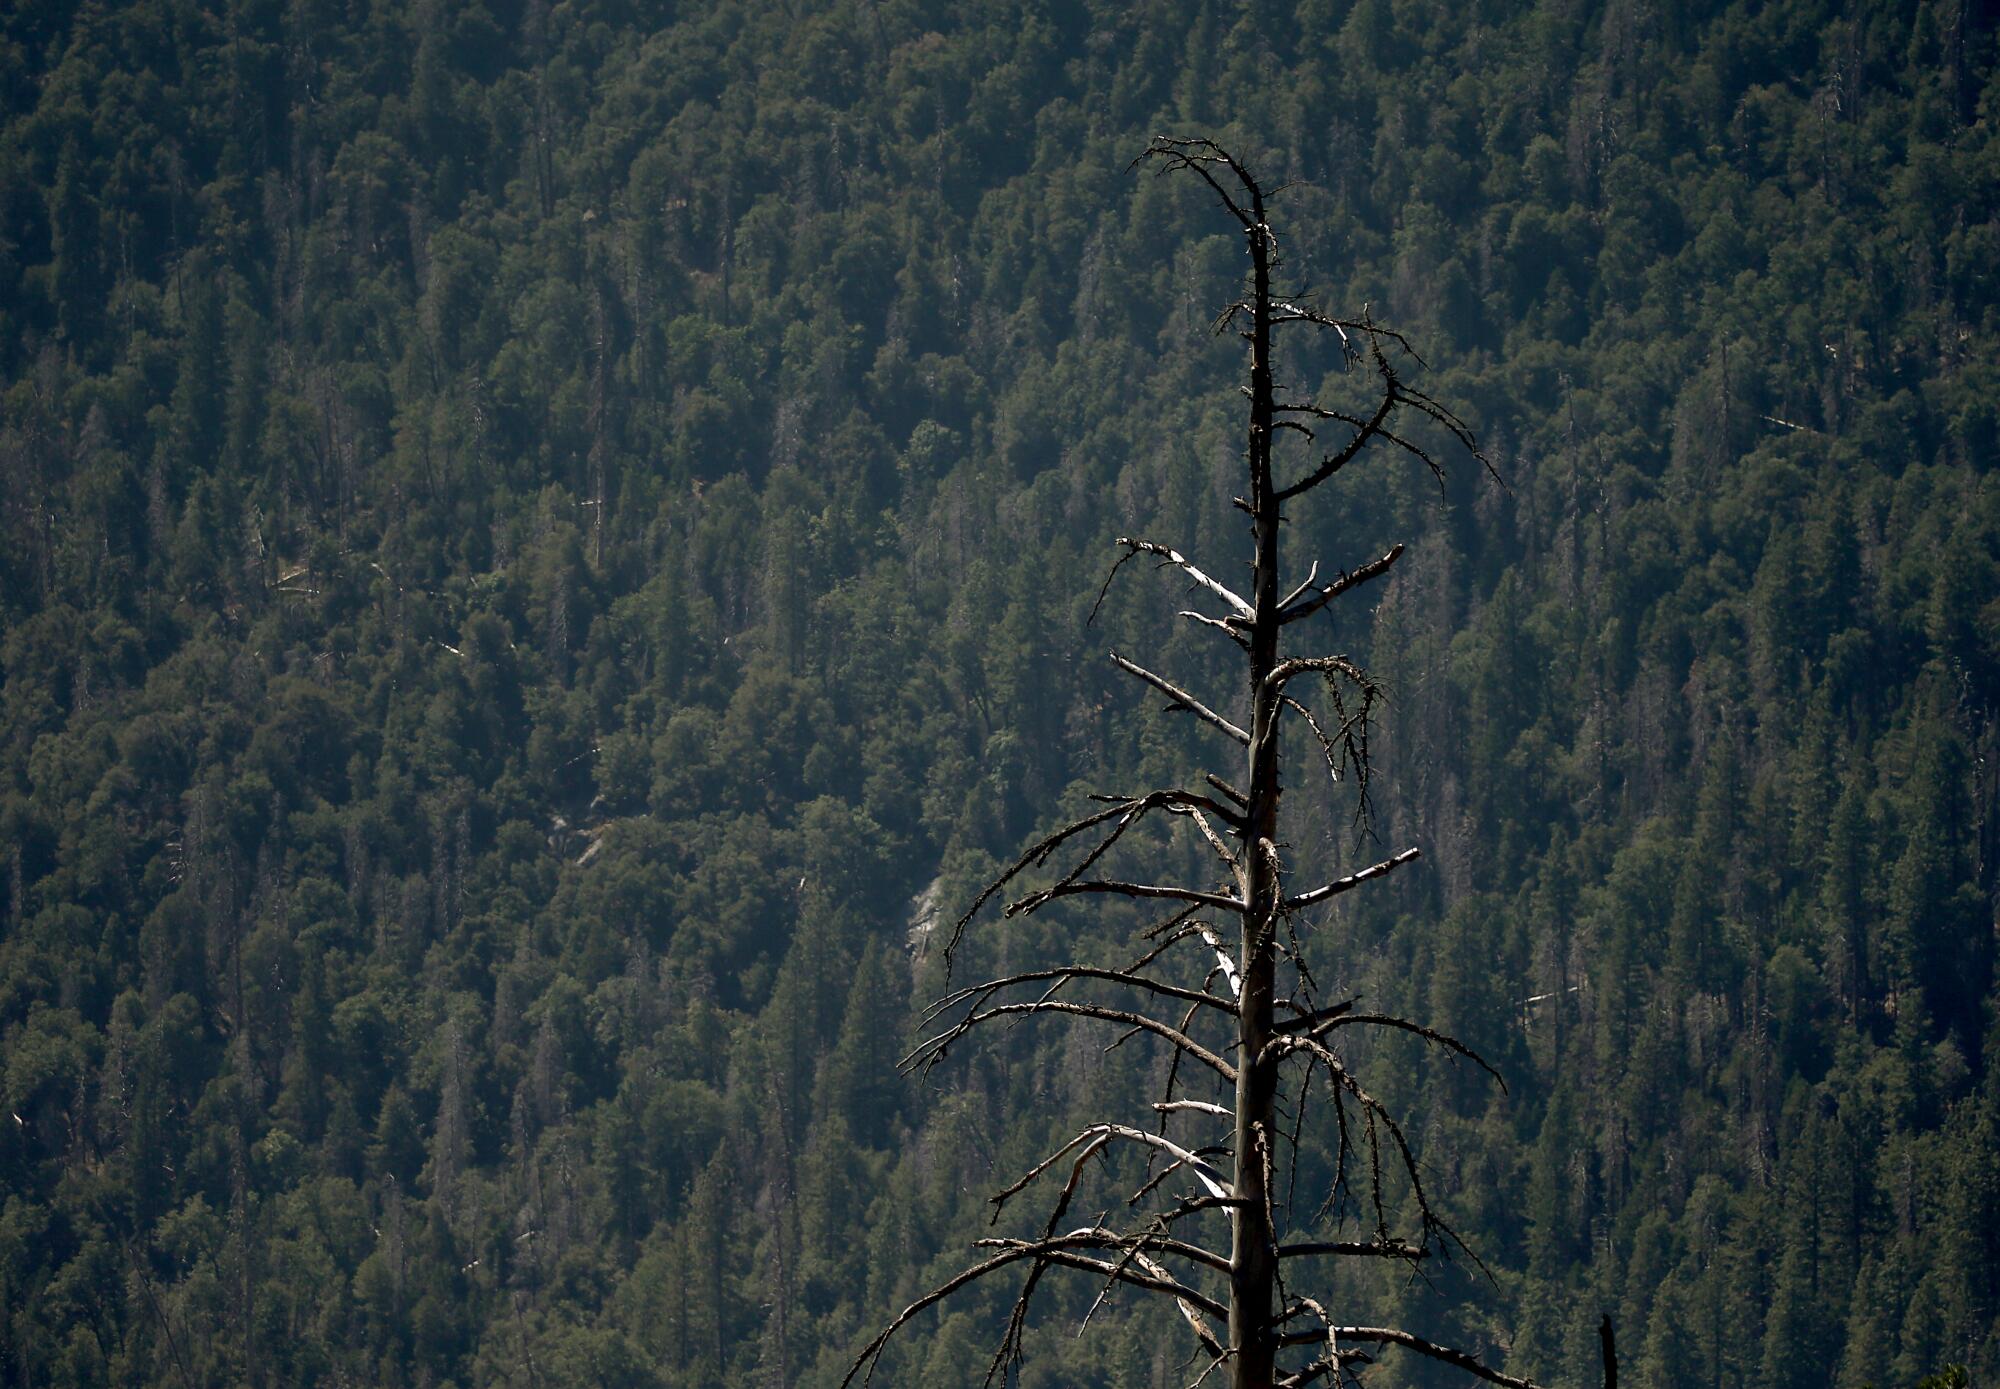 A lone burned tree standing naked against a backdrop of live evergreens in the distance